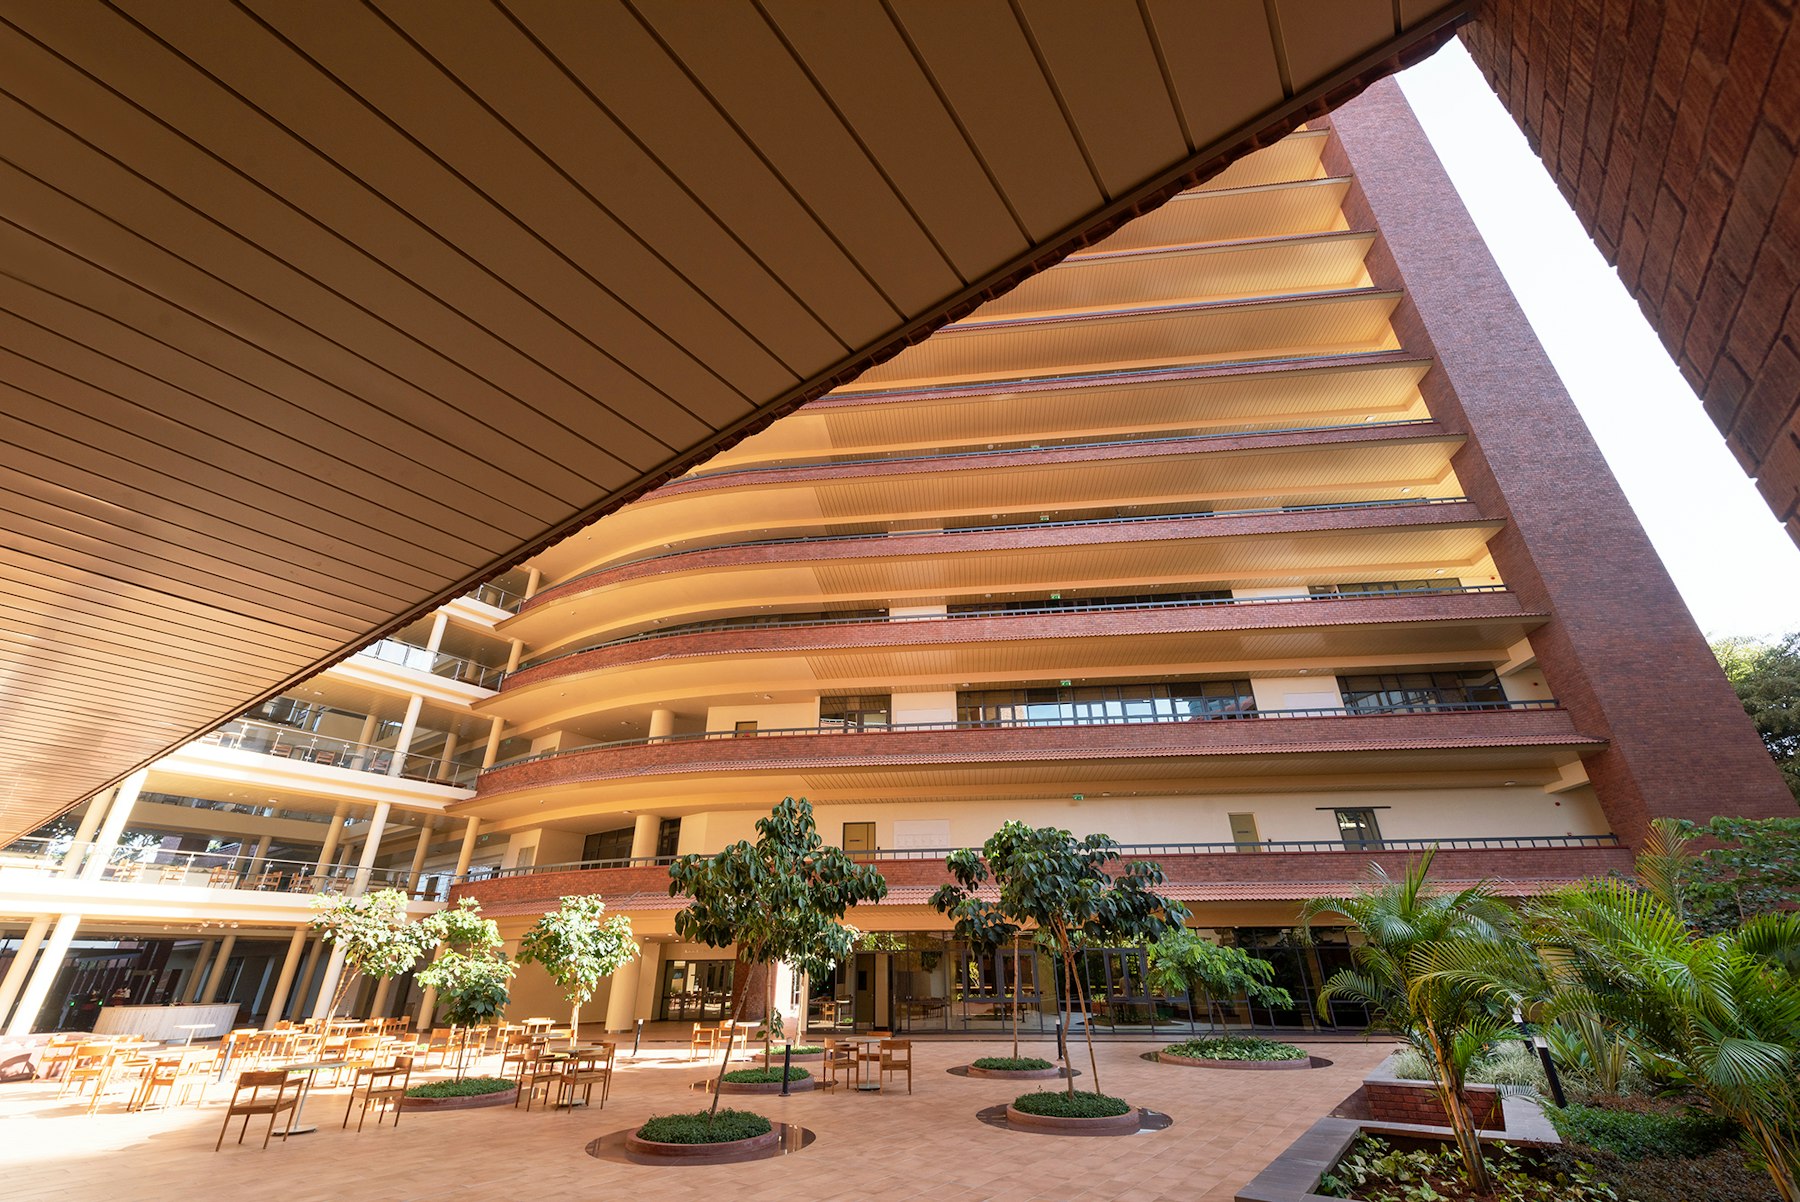 The central courtyard functions like a town square for students and faculty.